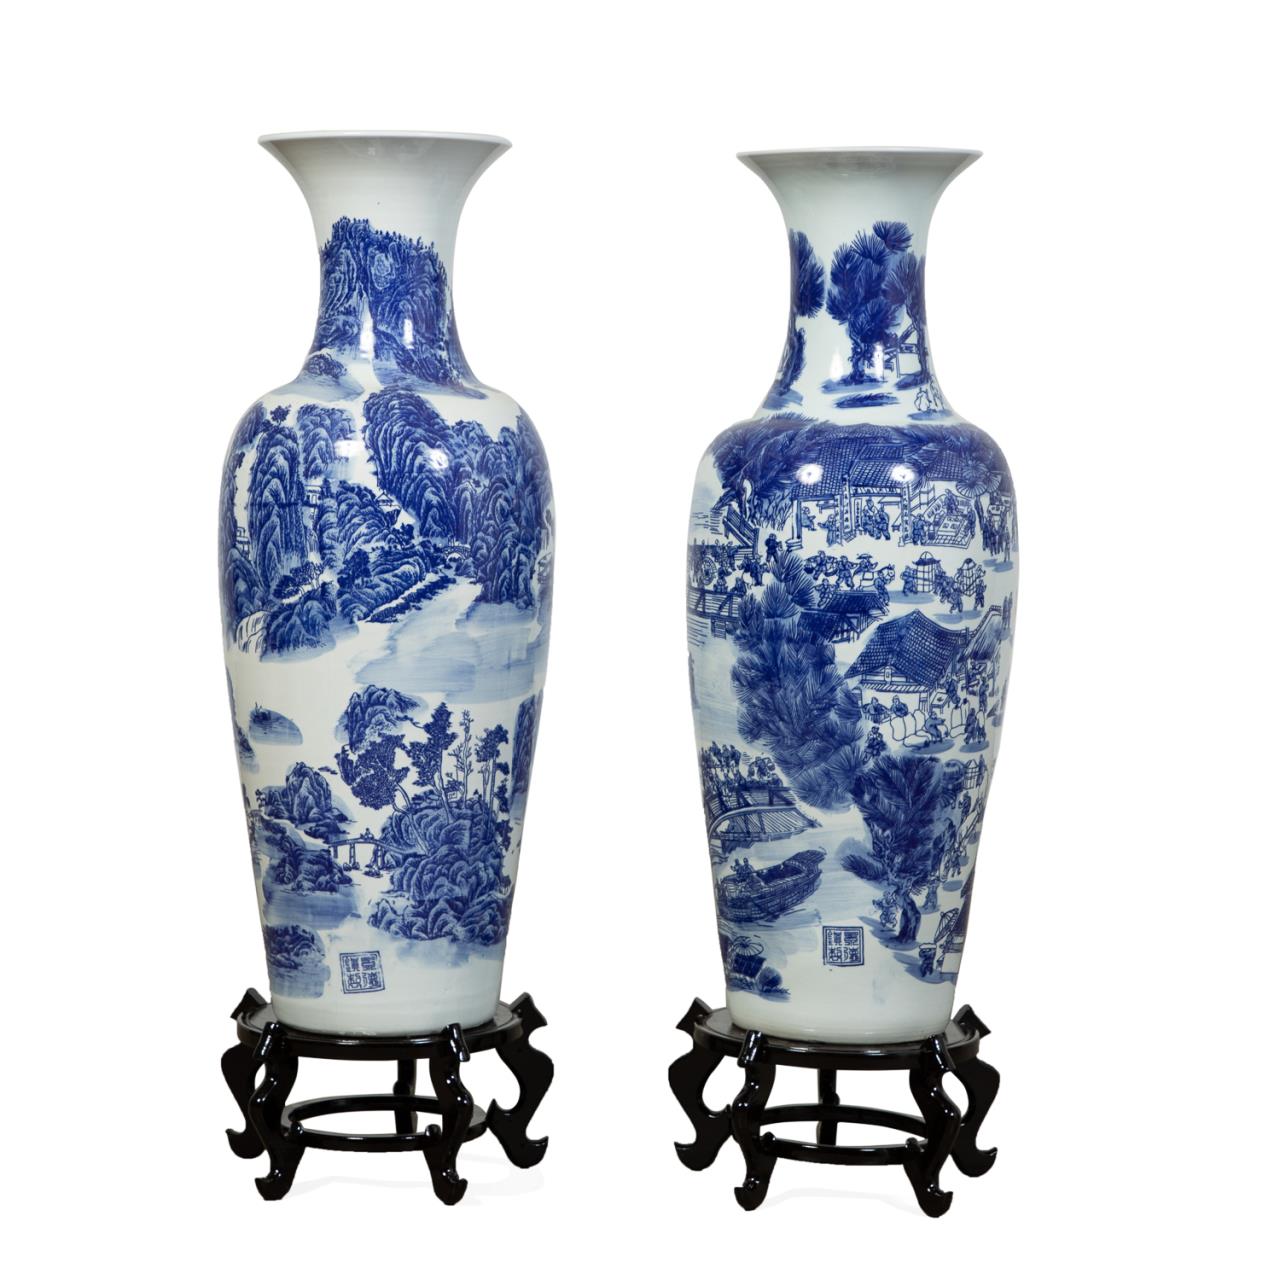 PAIR OF MING STYLE CHINESE BLUE 29f75b